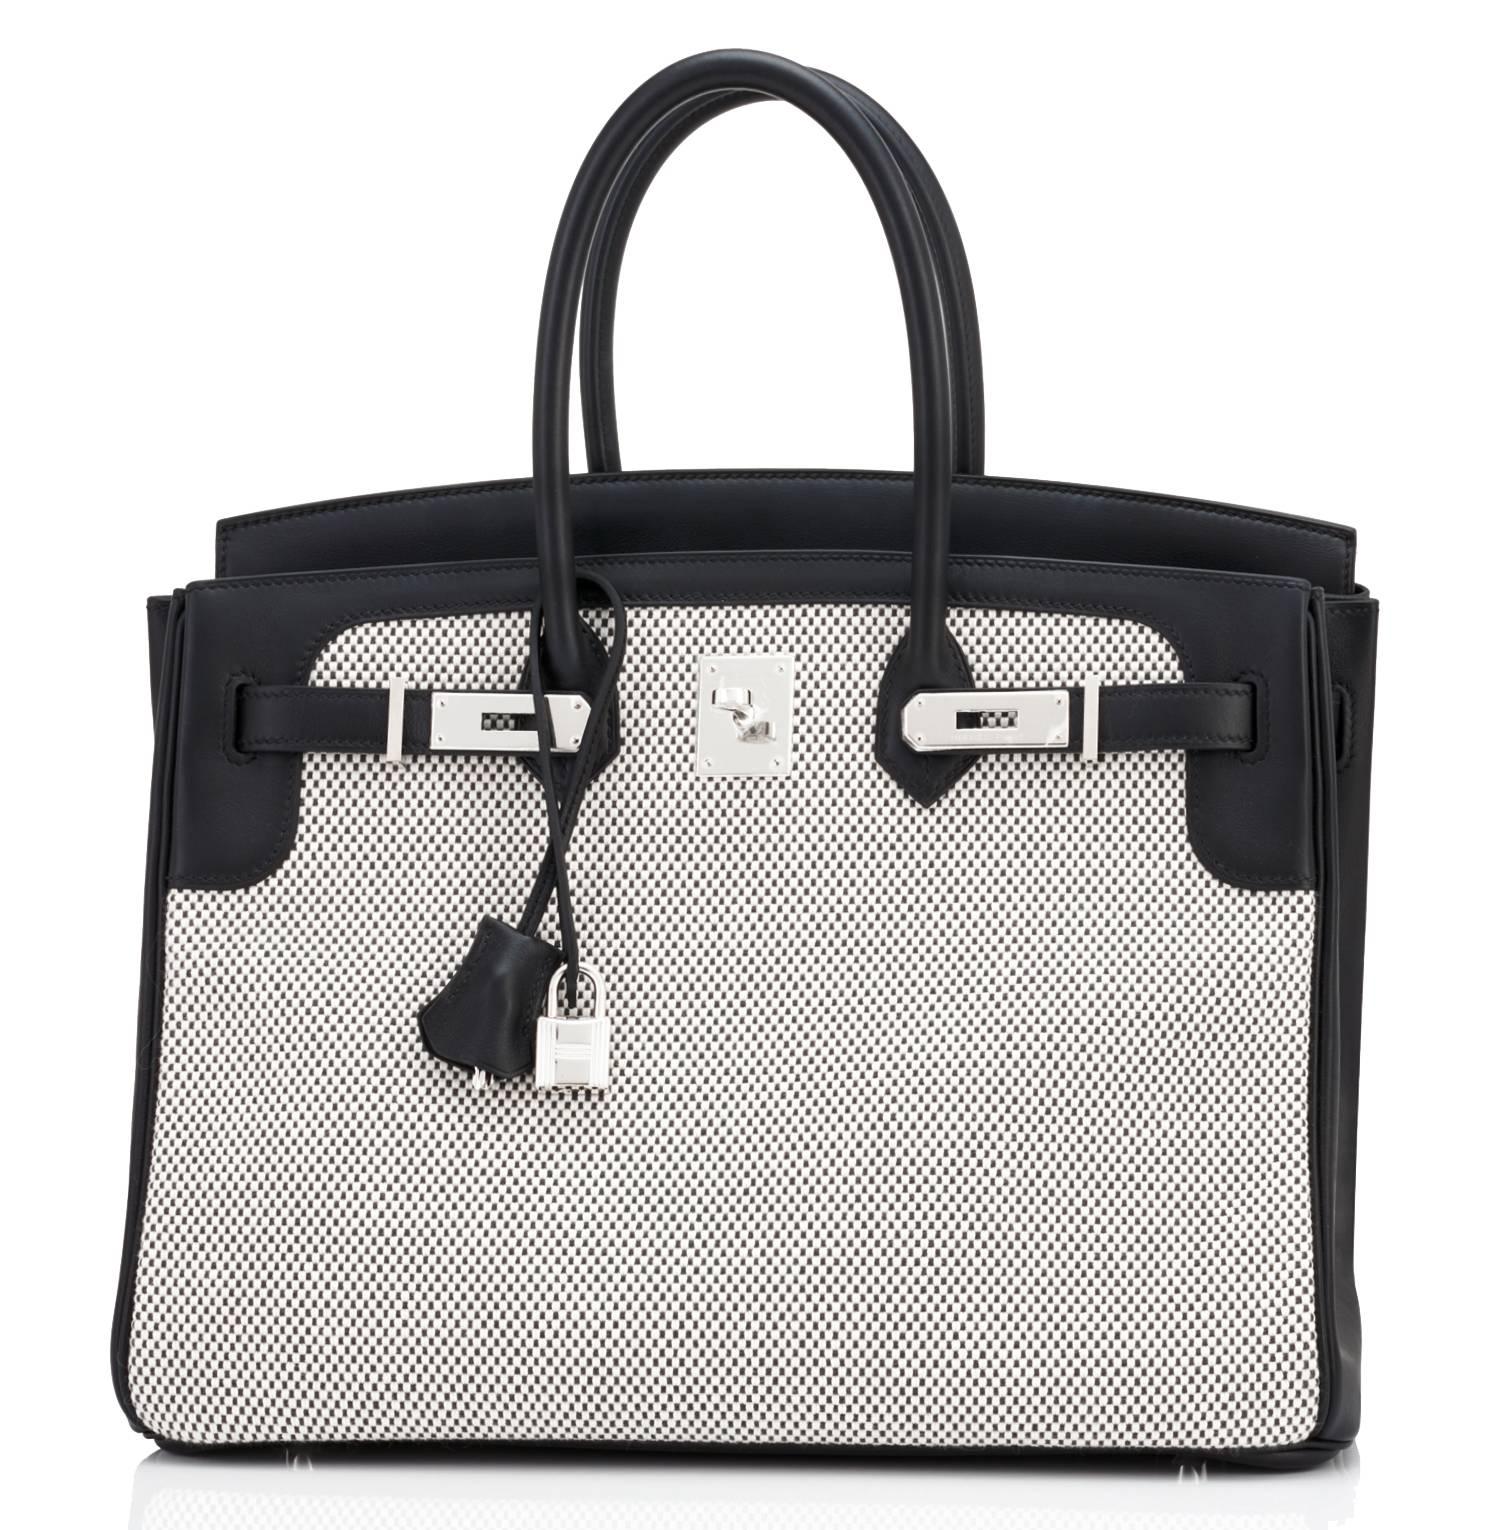 Hermes Black Swift Leather Criss Cross Ecru Graphite Toile 35cm Birkin 
Brand New in Box. Store fresh. Pristine condition (with plastic on hardware). 
Perfect gift! Comes full set with keys, lock, clochette, a sleeper for the bag, rain protector,